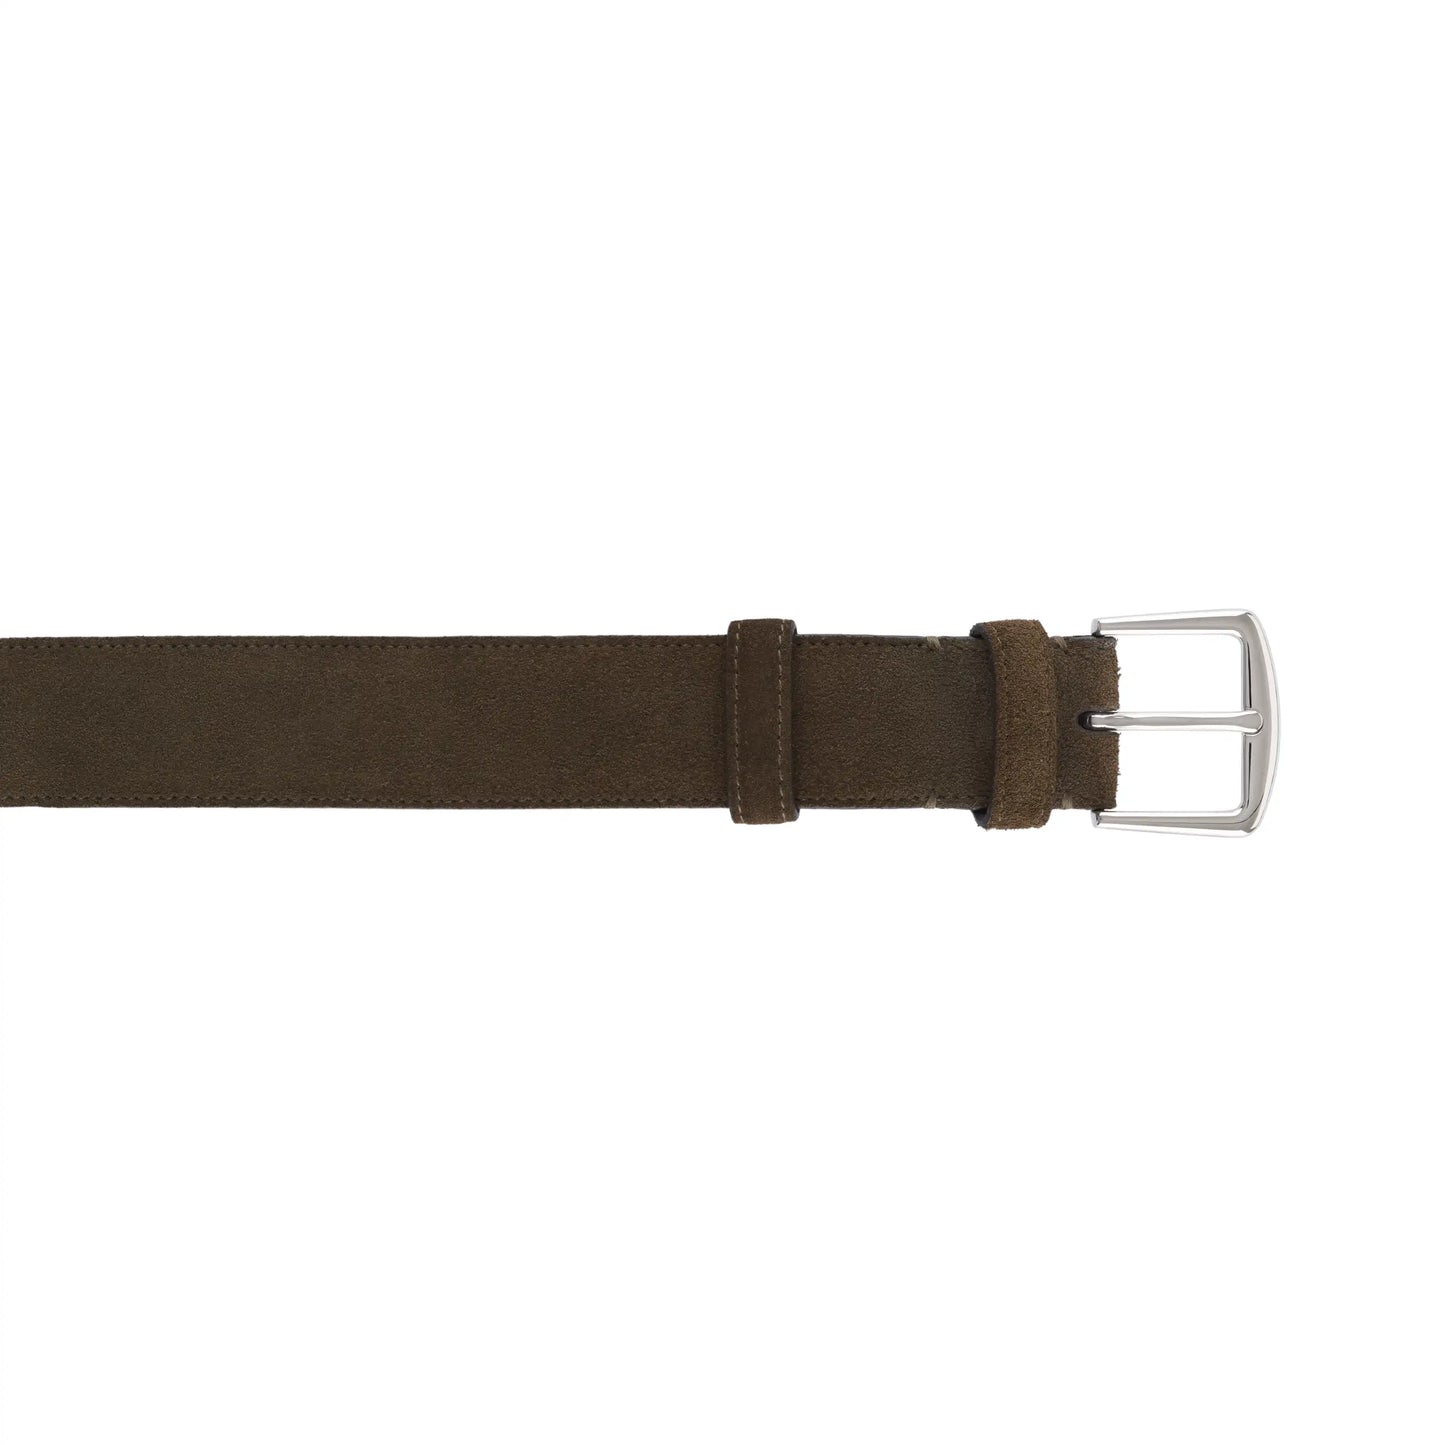 Suede Leather Belt in Olive Green